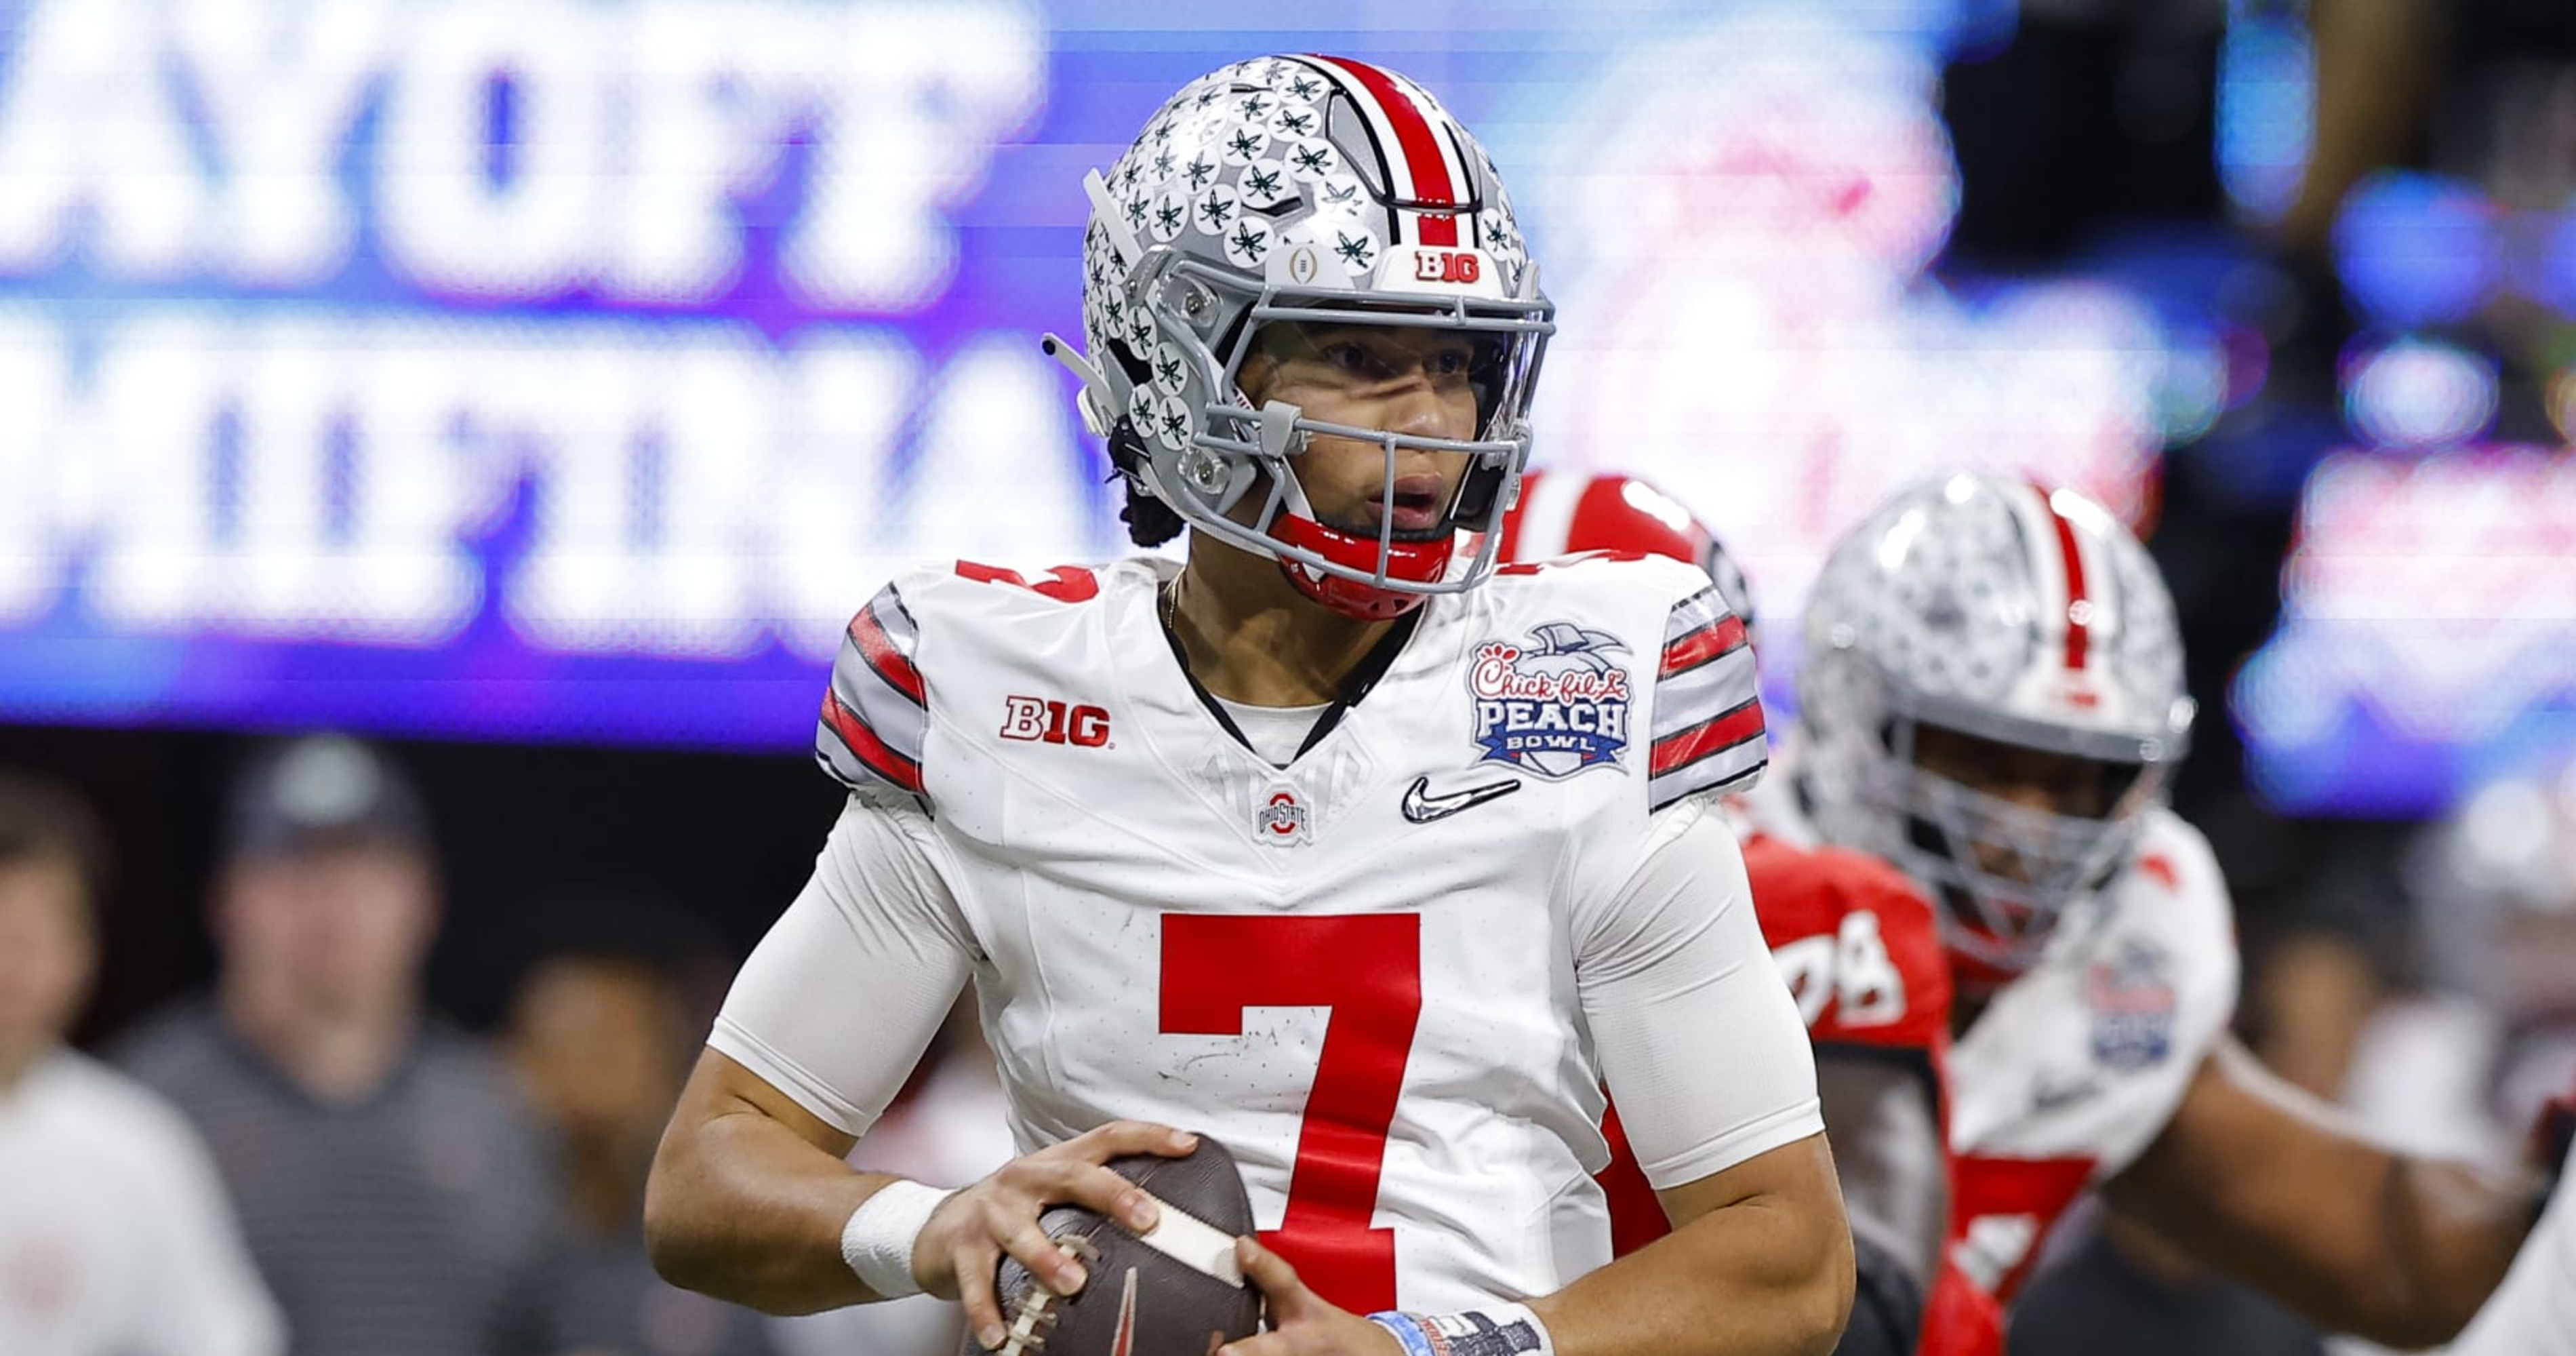 2022 NFL Draft: Landing Spot Considerations for Some Key Rookies